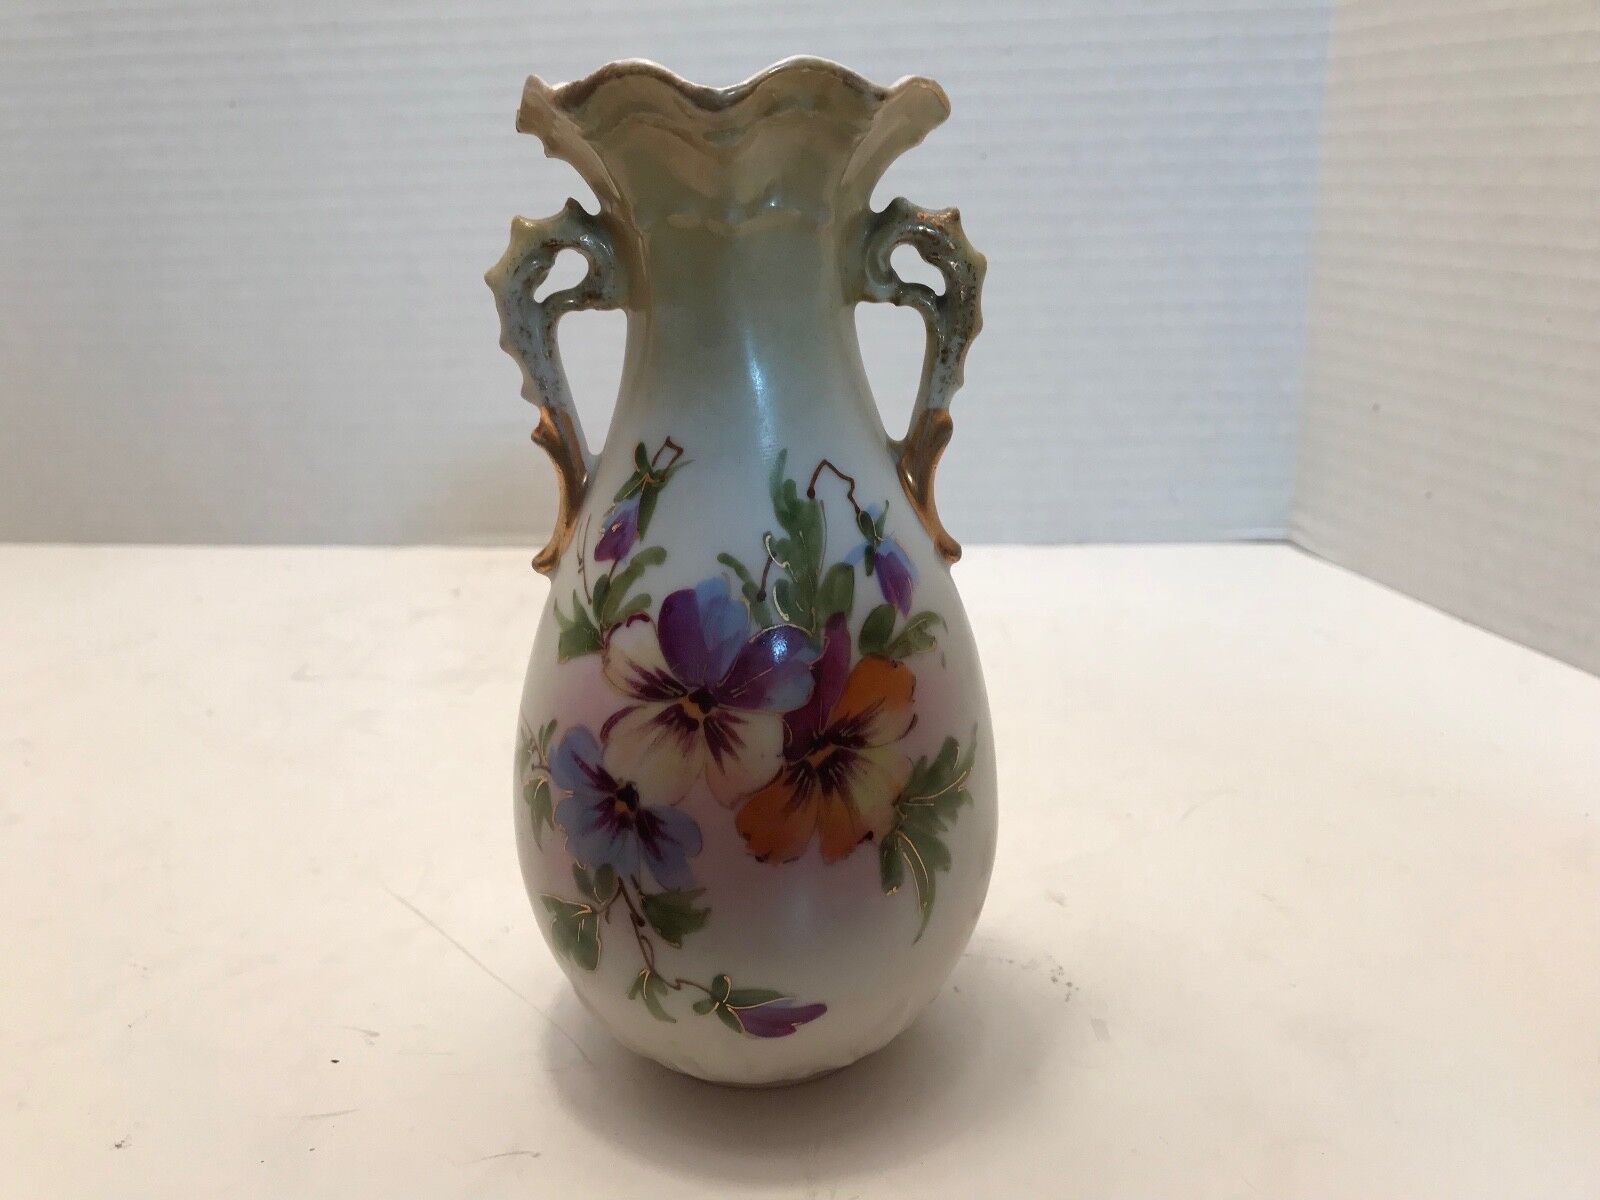 Flower Vase with Gold Rim and Handles Made in Austria Signed Ge 27 13